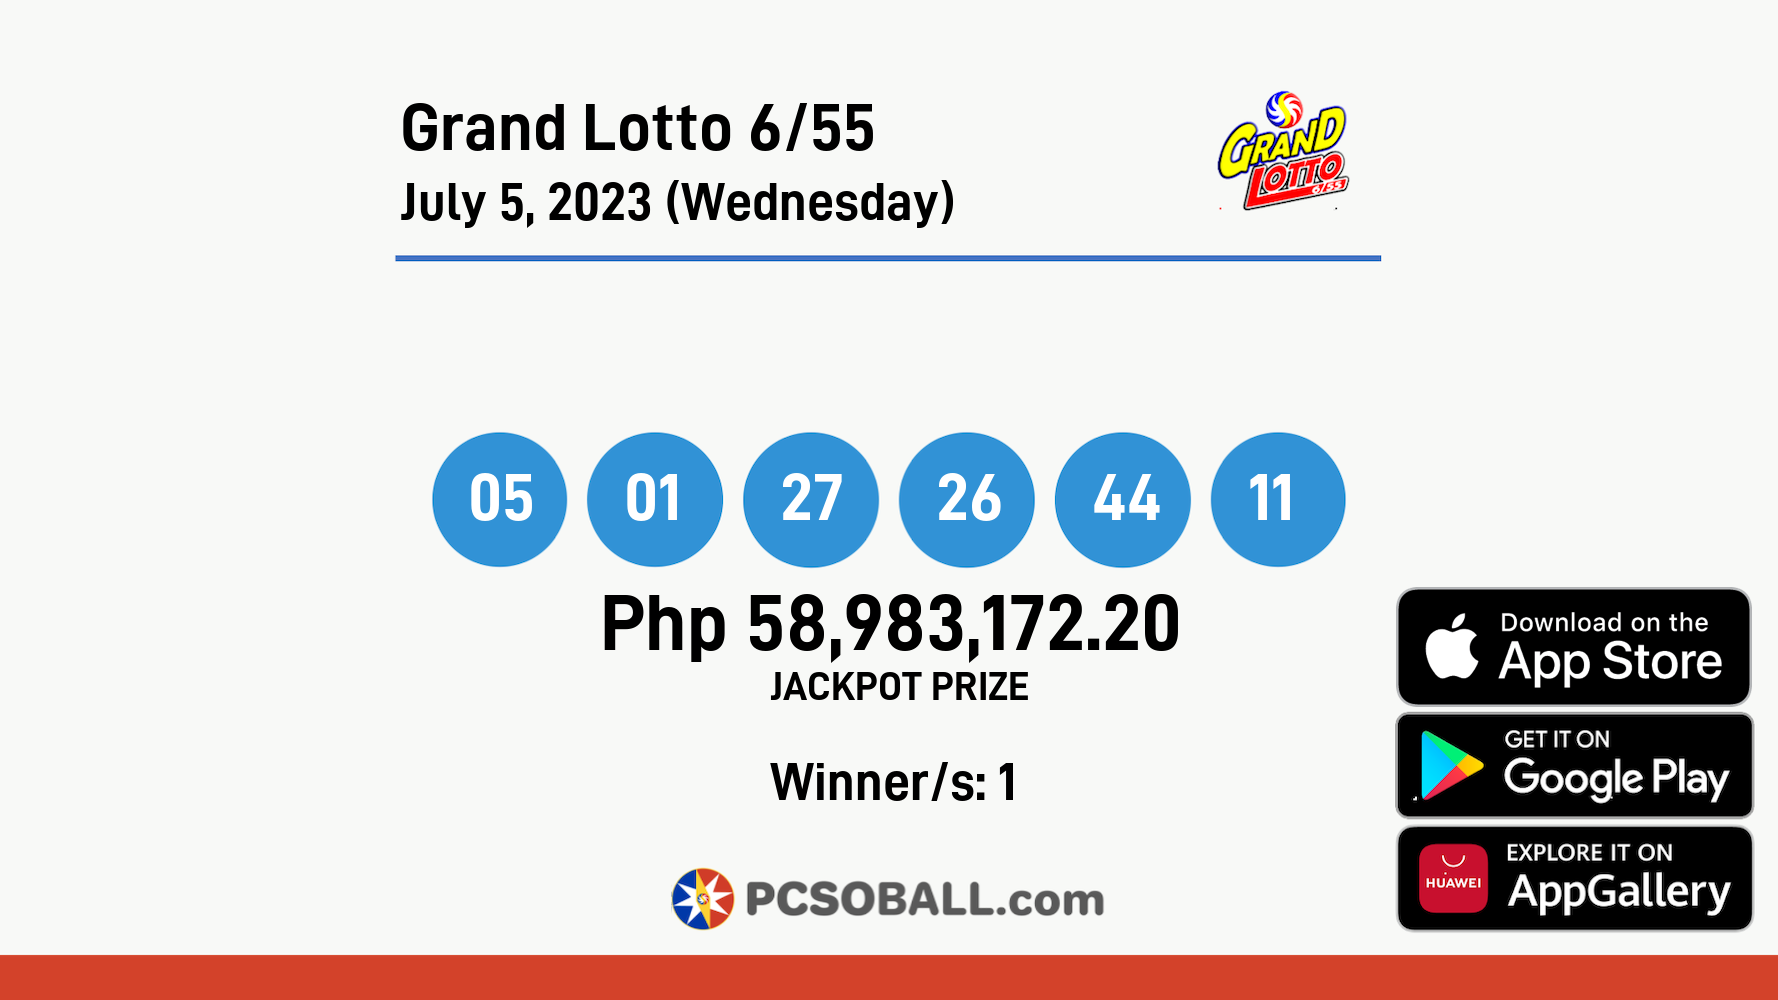 Grand Lotto 6/55 July 5, 2023 (Wednesday) Result